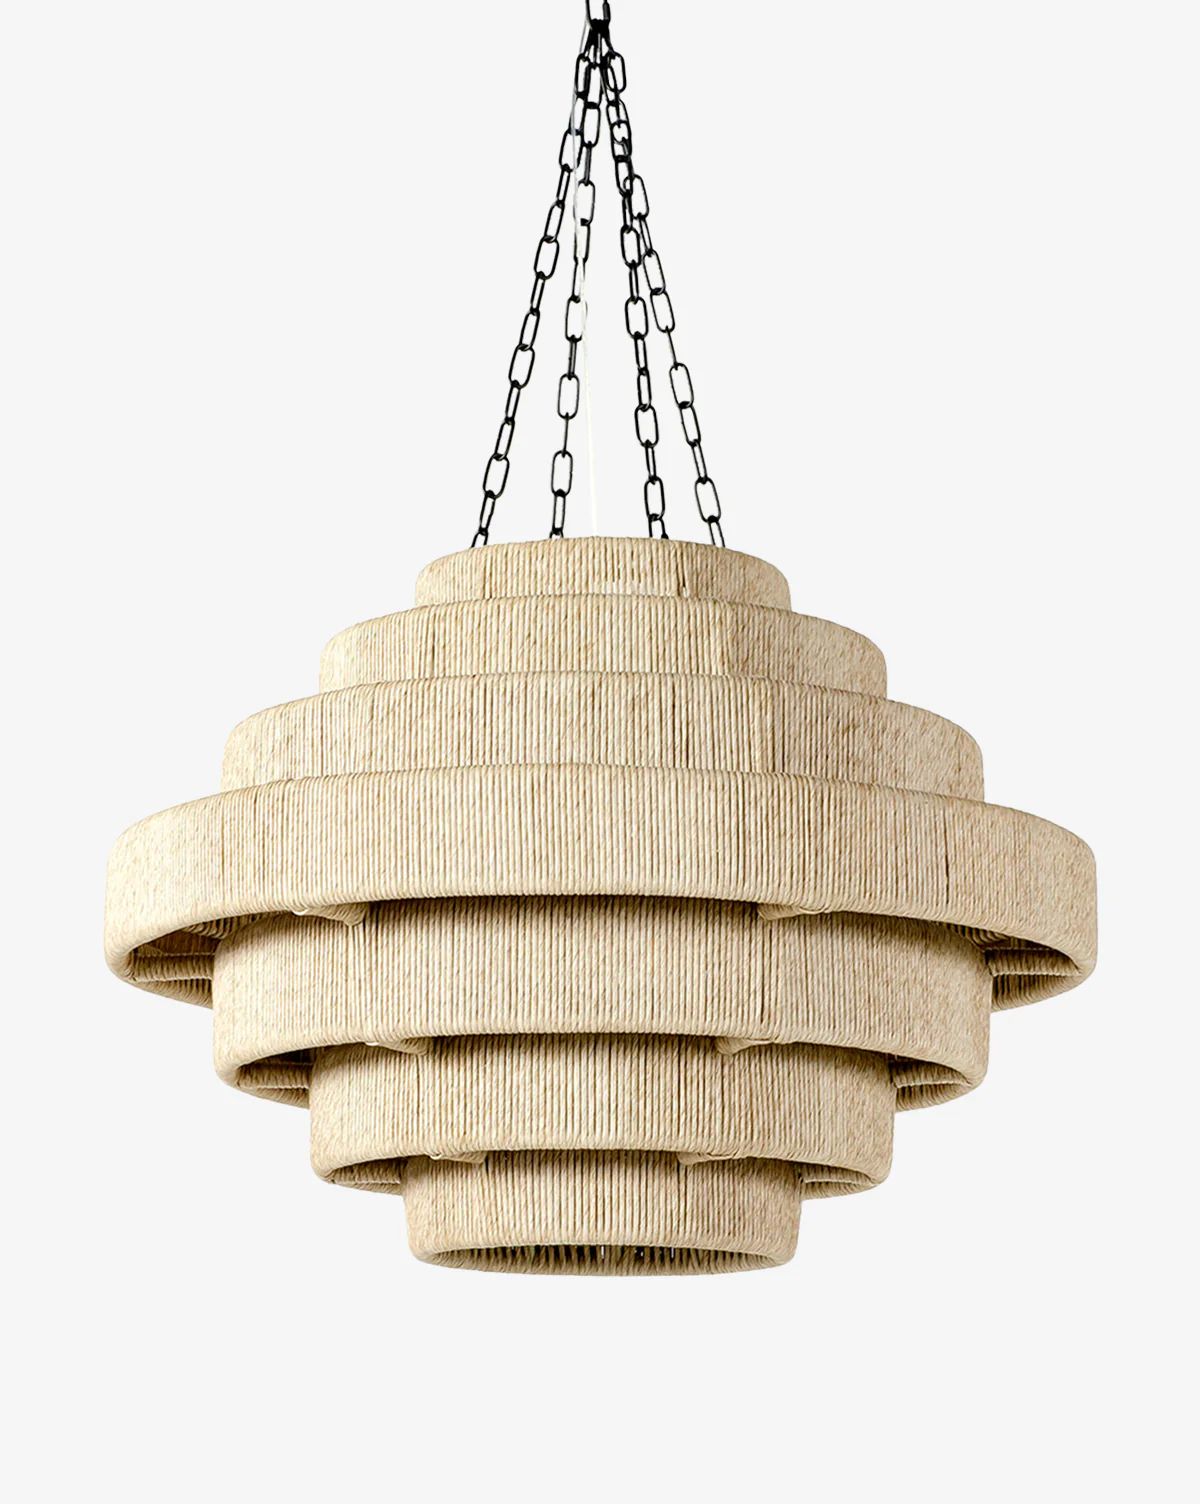 Everly Pendant | McGee & Co.